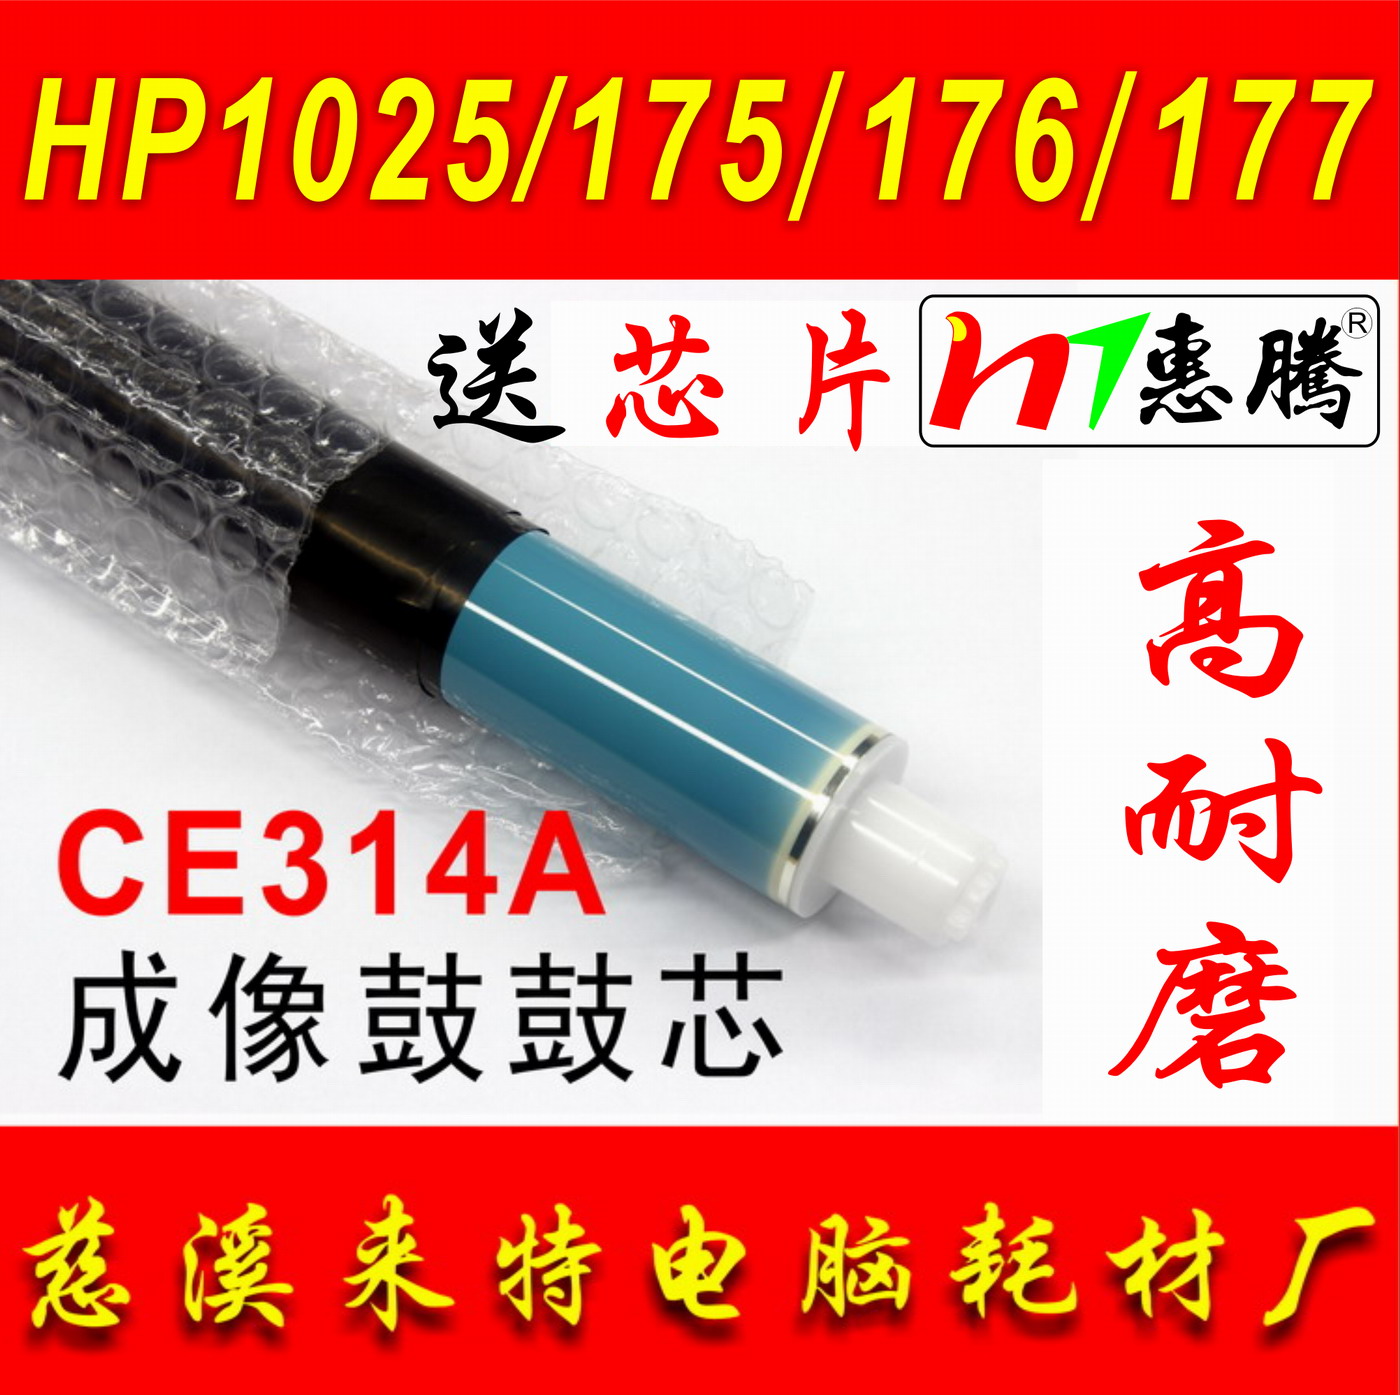 惠腾 HP惠普CE314A鼓芯CP1025成像鼓芯M175NW M176n M177fw鼓芯